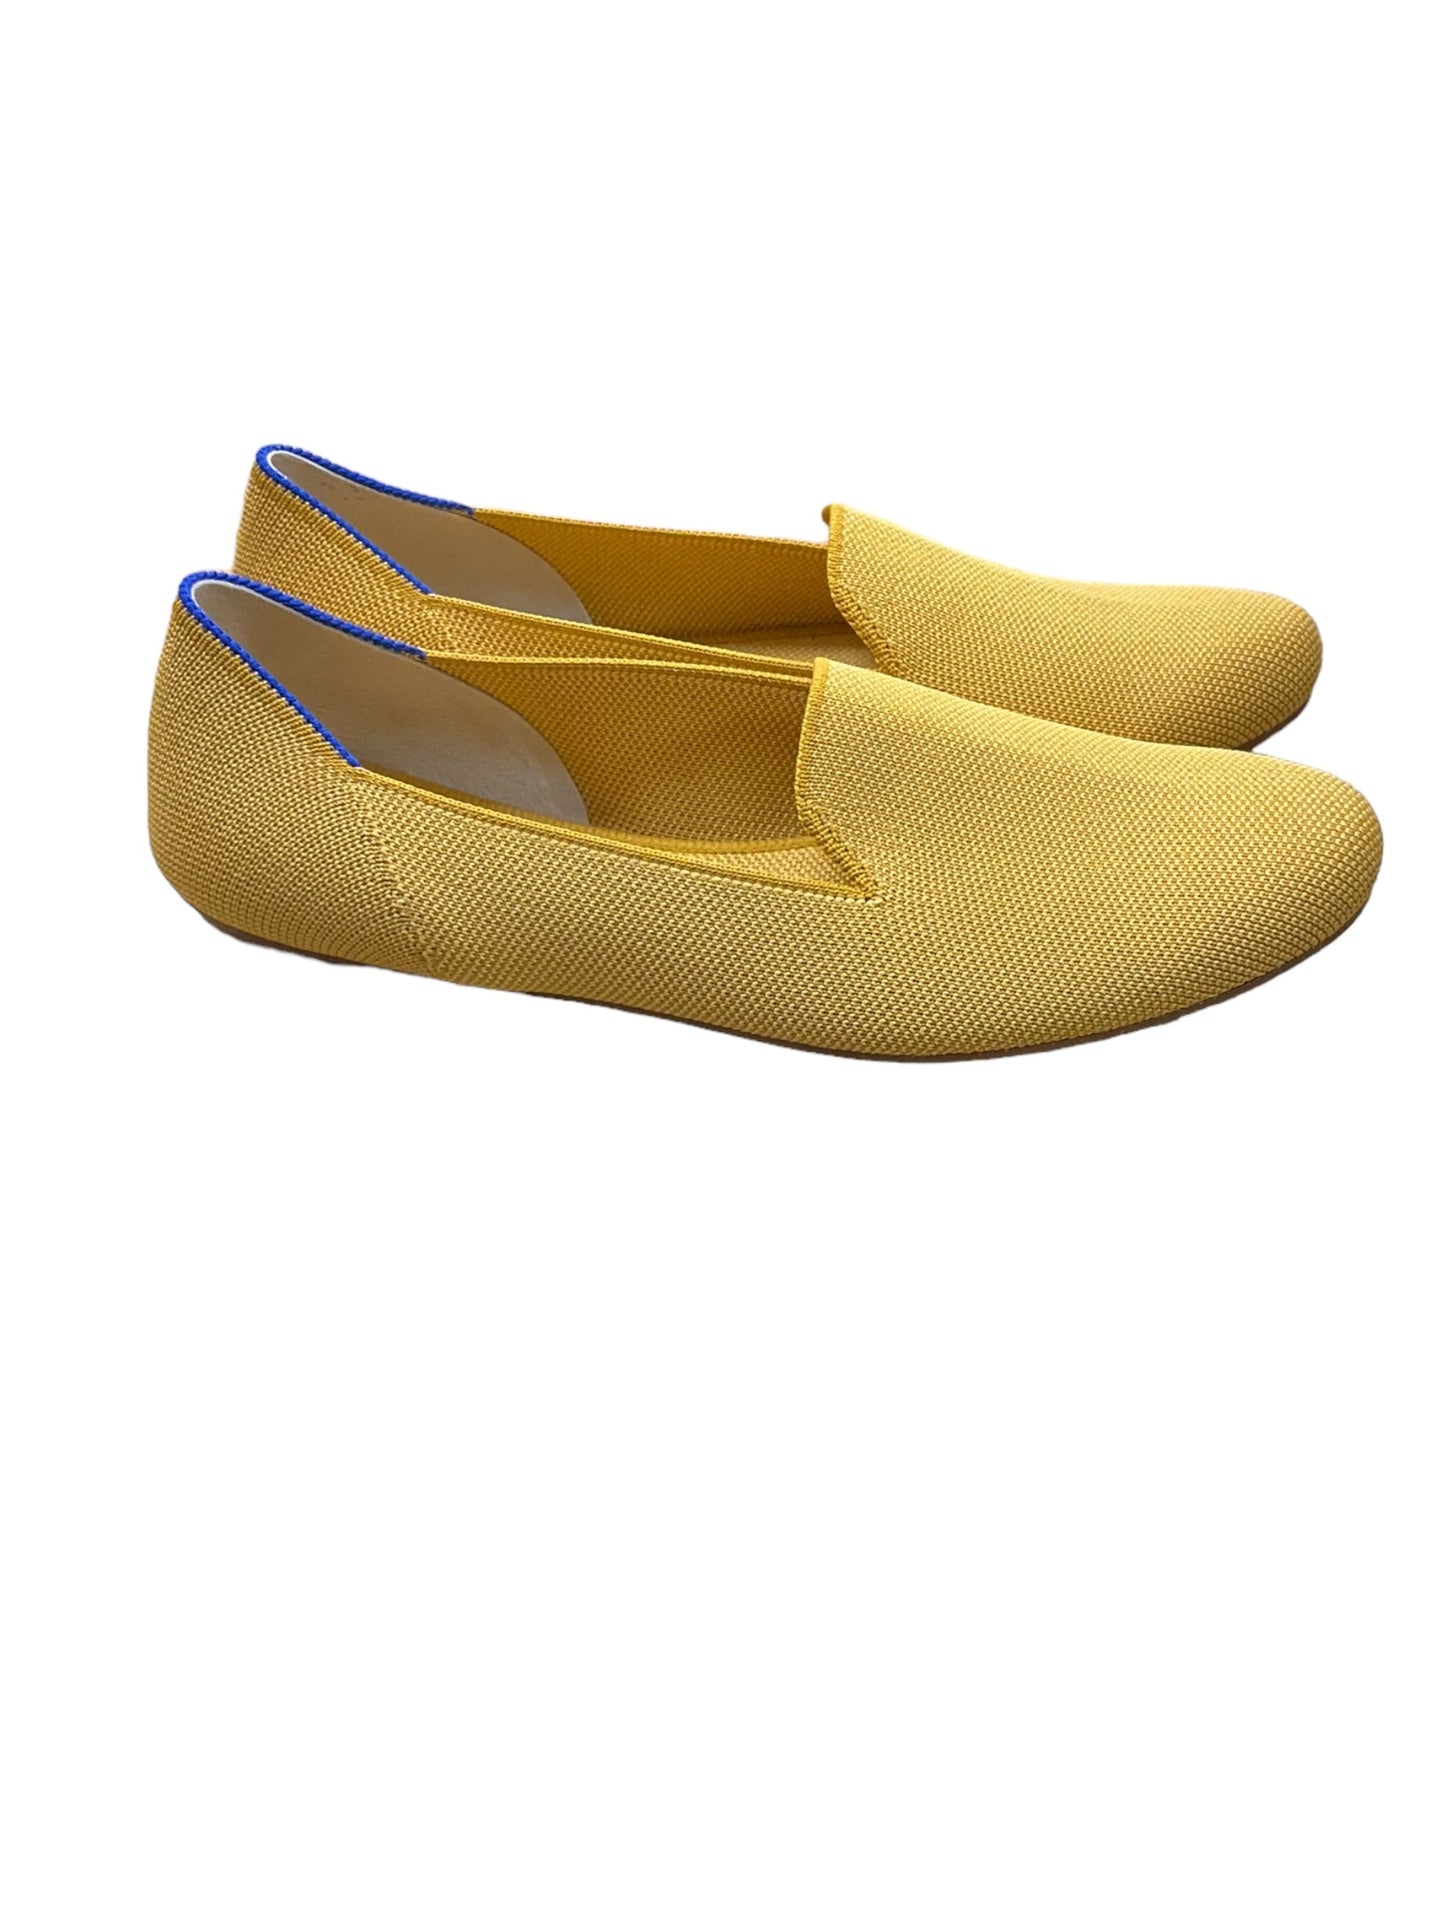 Yellow Shoes Flats Rothys, Size 8.5